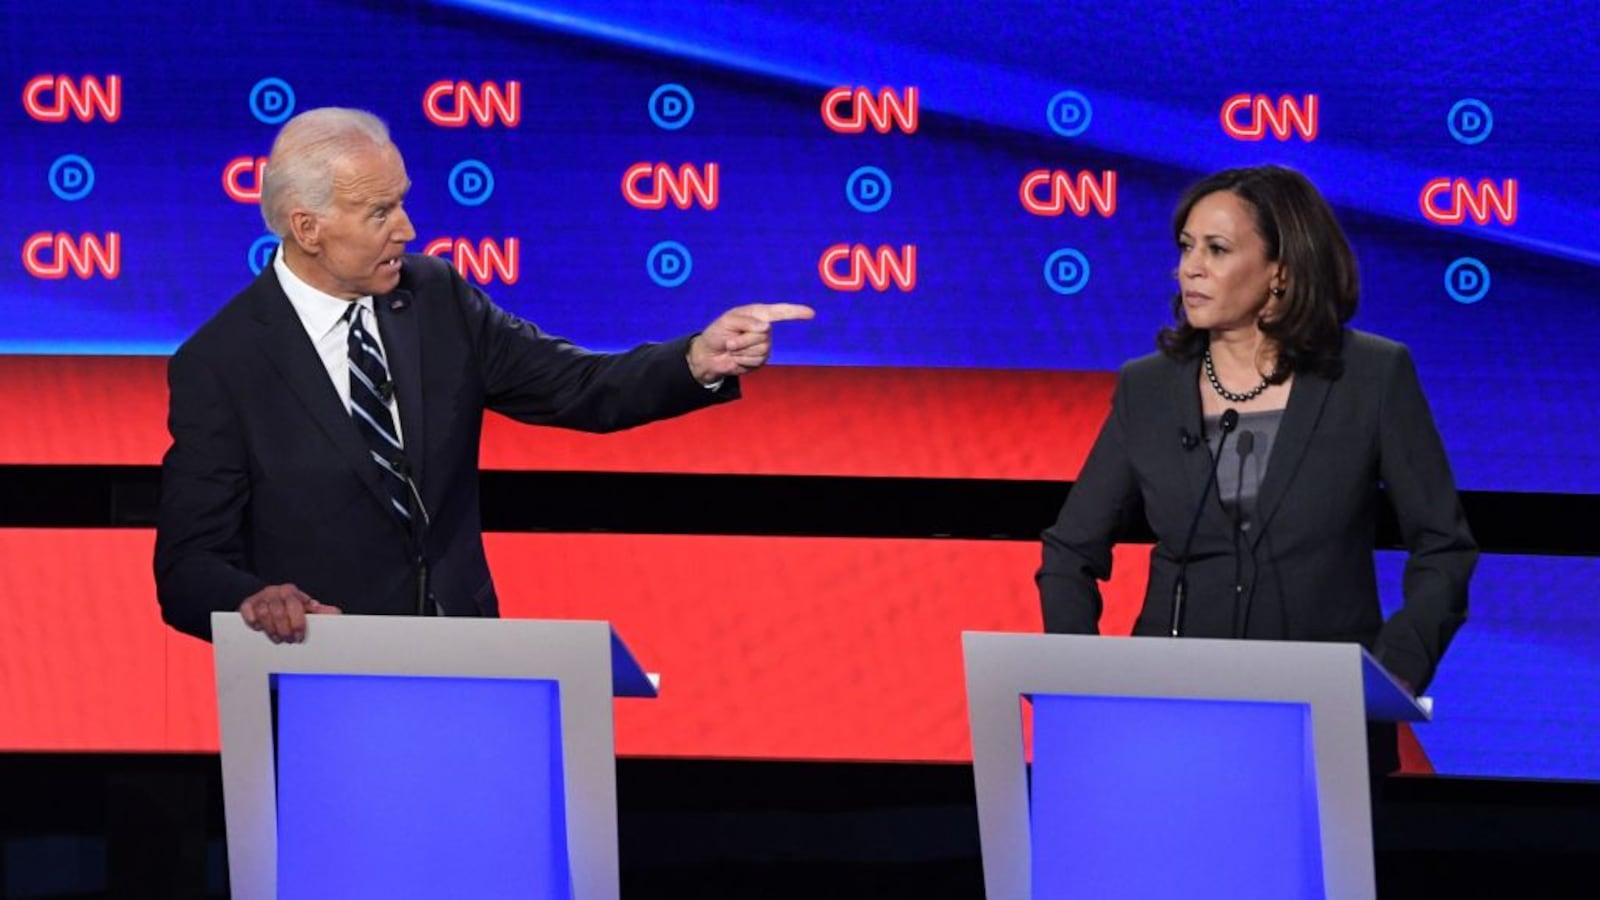 Democratic presidential hopeful Former Vice President Joe Biden (L) gestures toward US Senator from California Kamala Harris during the second round of the second Democratic primary debate of the 2020 presidential campaign season hosted by CNN at the Fox Theatre in Detroit, Michigan on July 31, 2019.